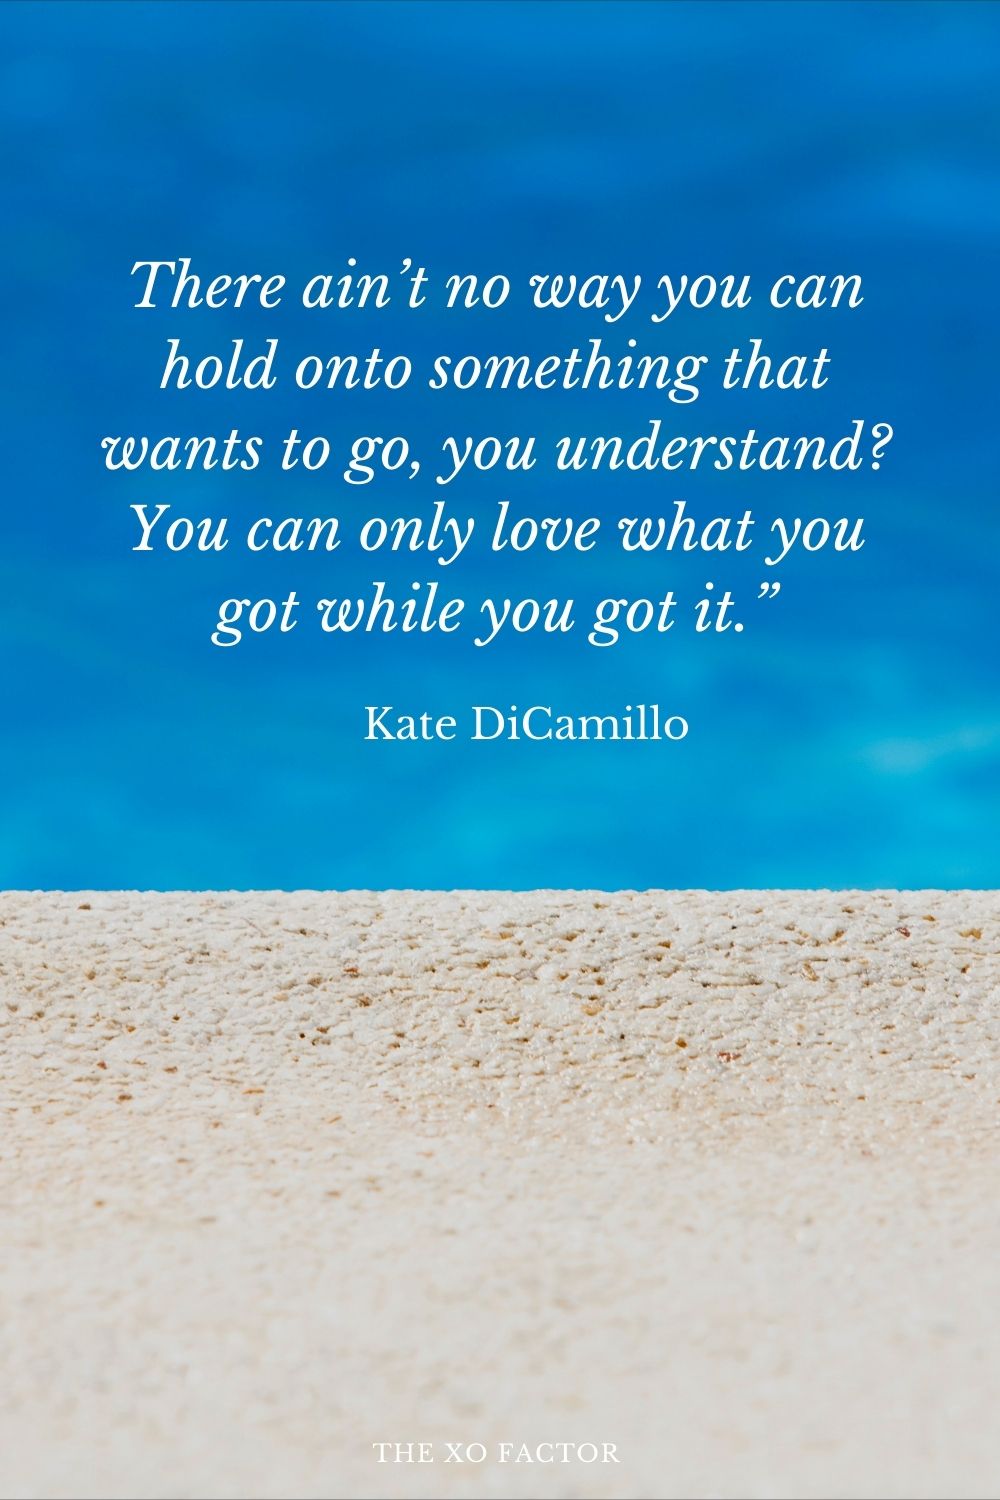 There ain’t no way you can hold onto something that wants to go, you understand? You can only love what you got while you got it.” Kate DiCamillo